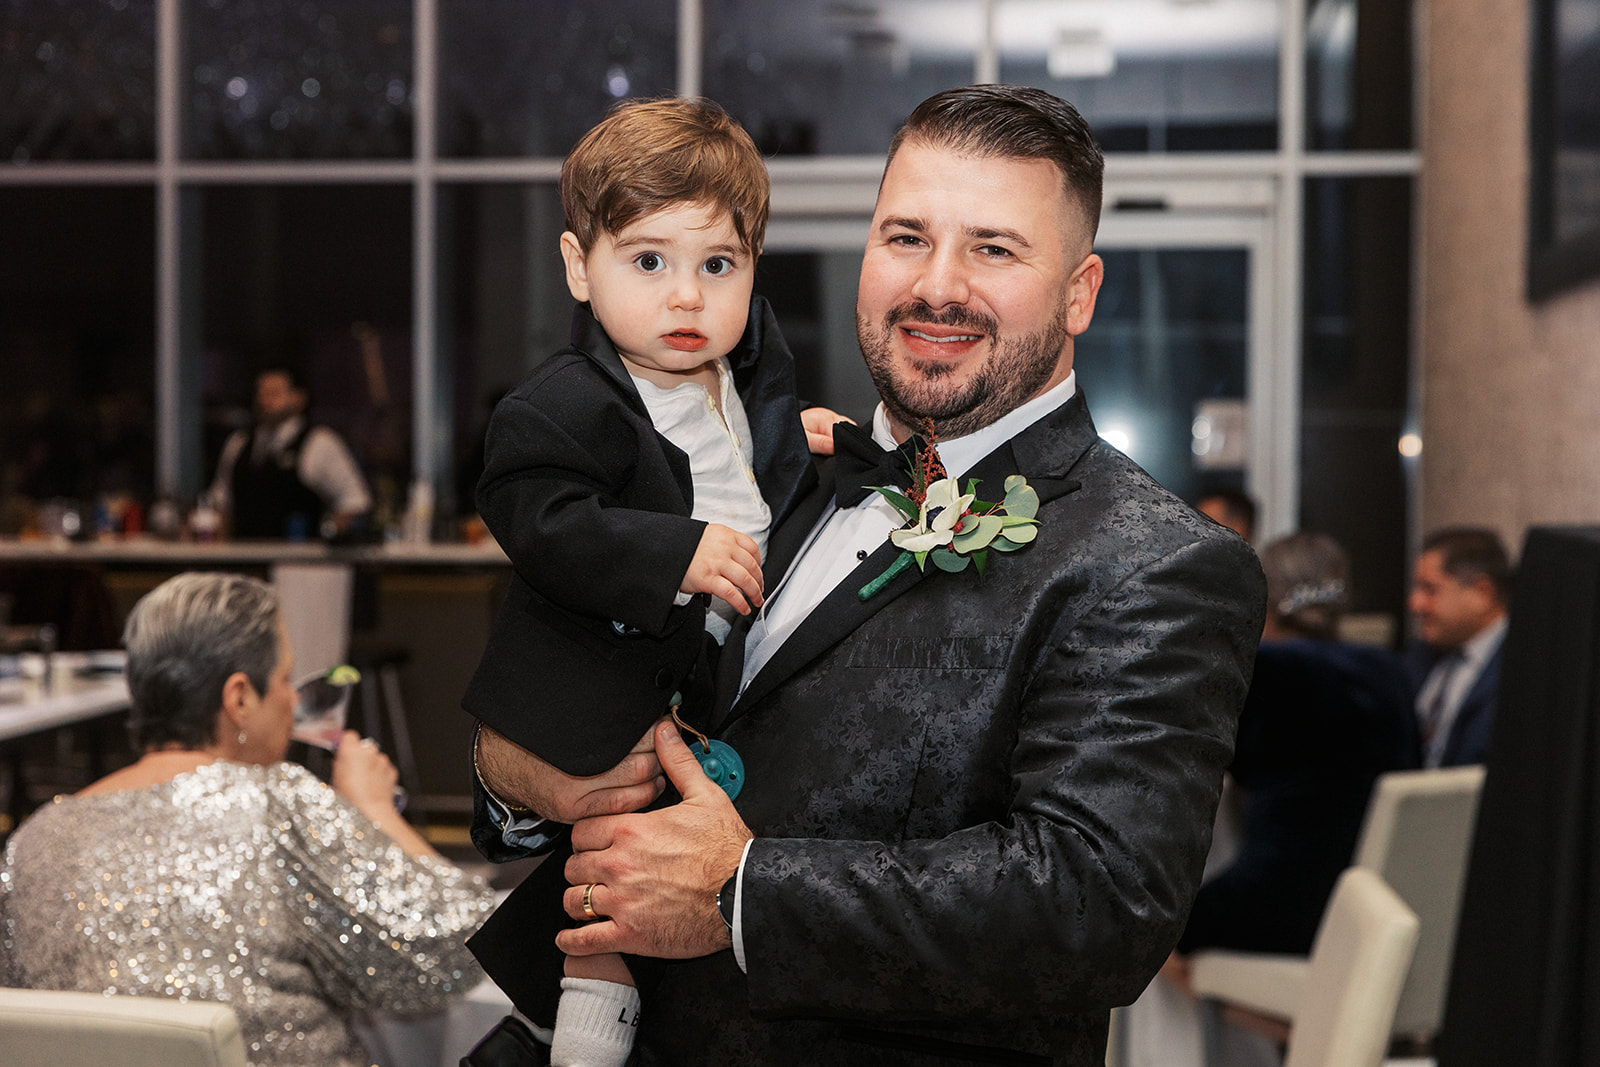 A groom in a black tuxedo holds a toddler boy during the reception of his Above Weddings